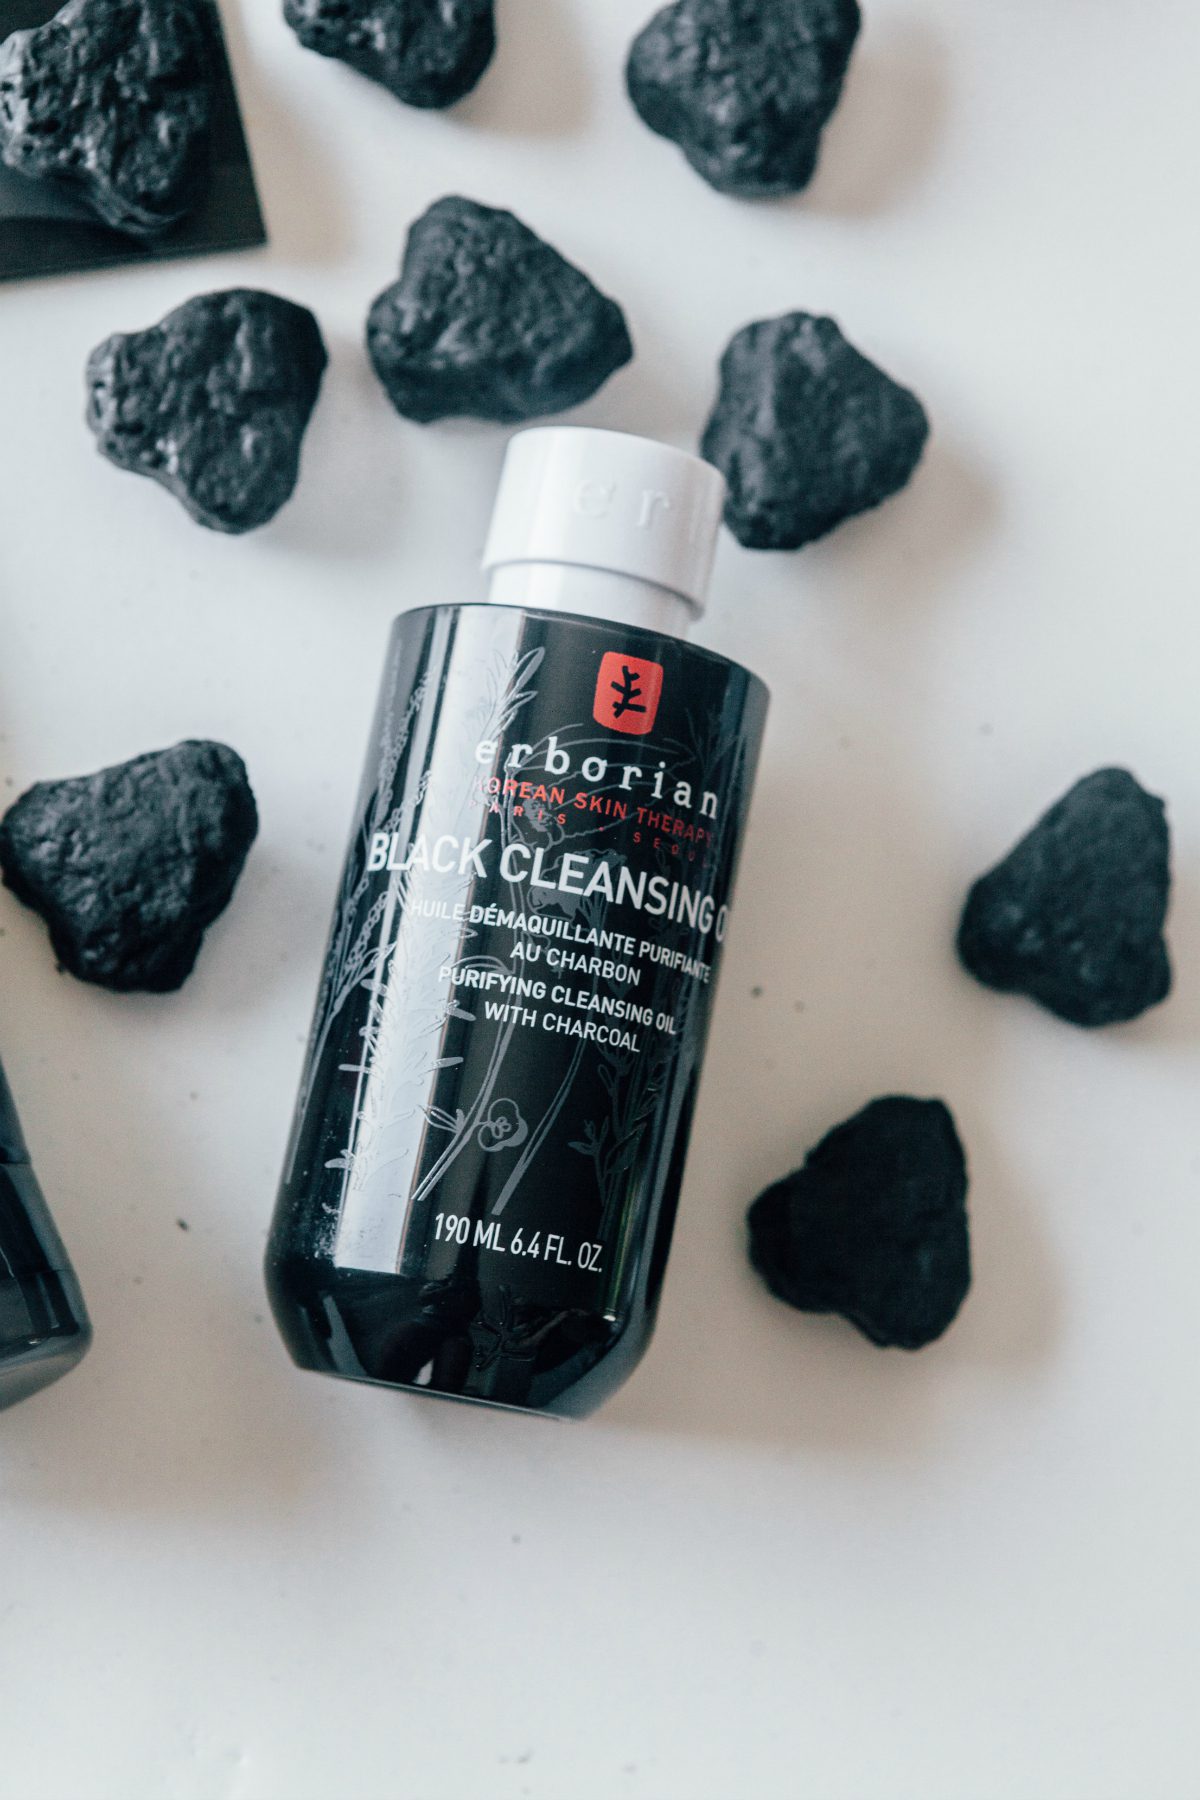 Charcoal-Infused Beauty Products from Erborian Black Cleansing Oil